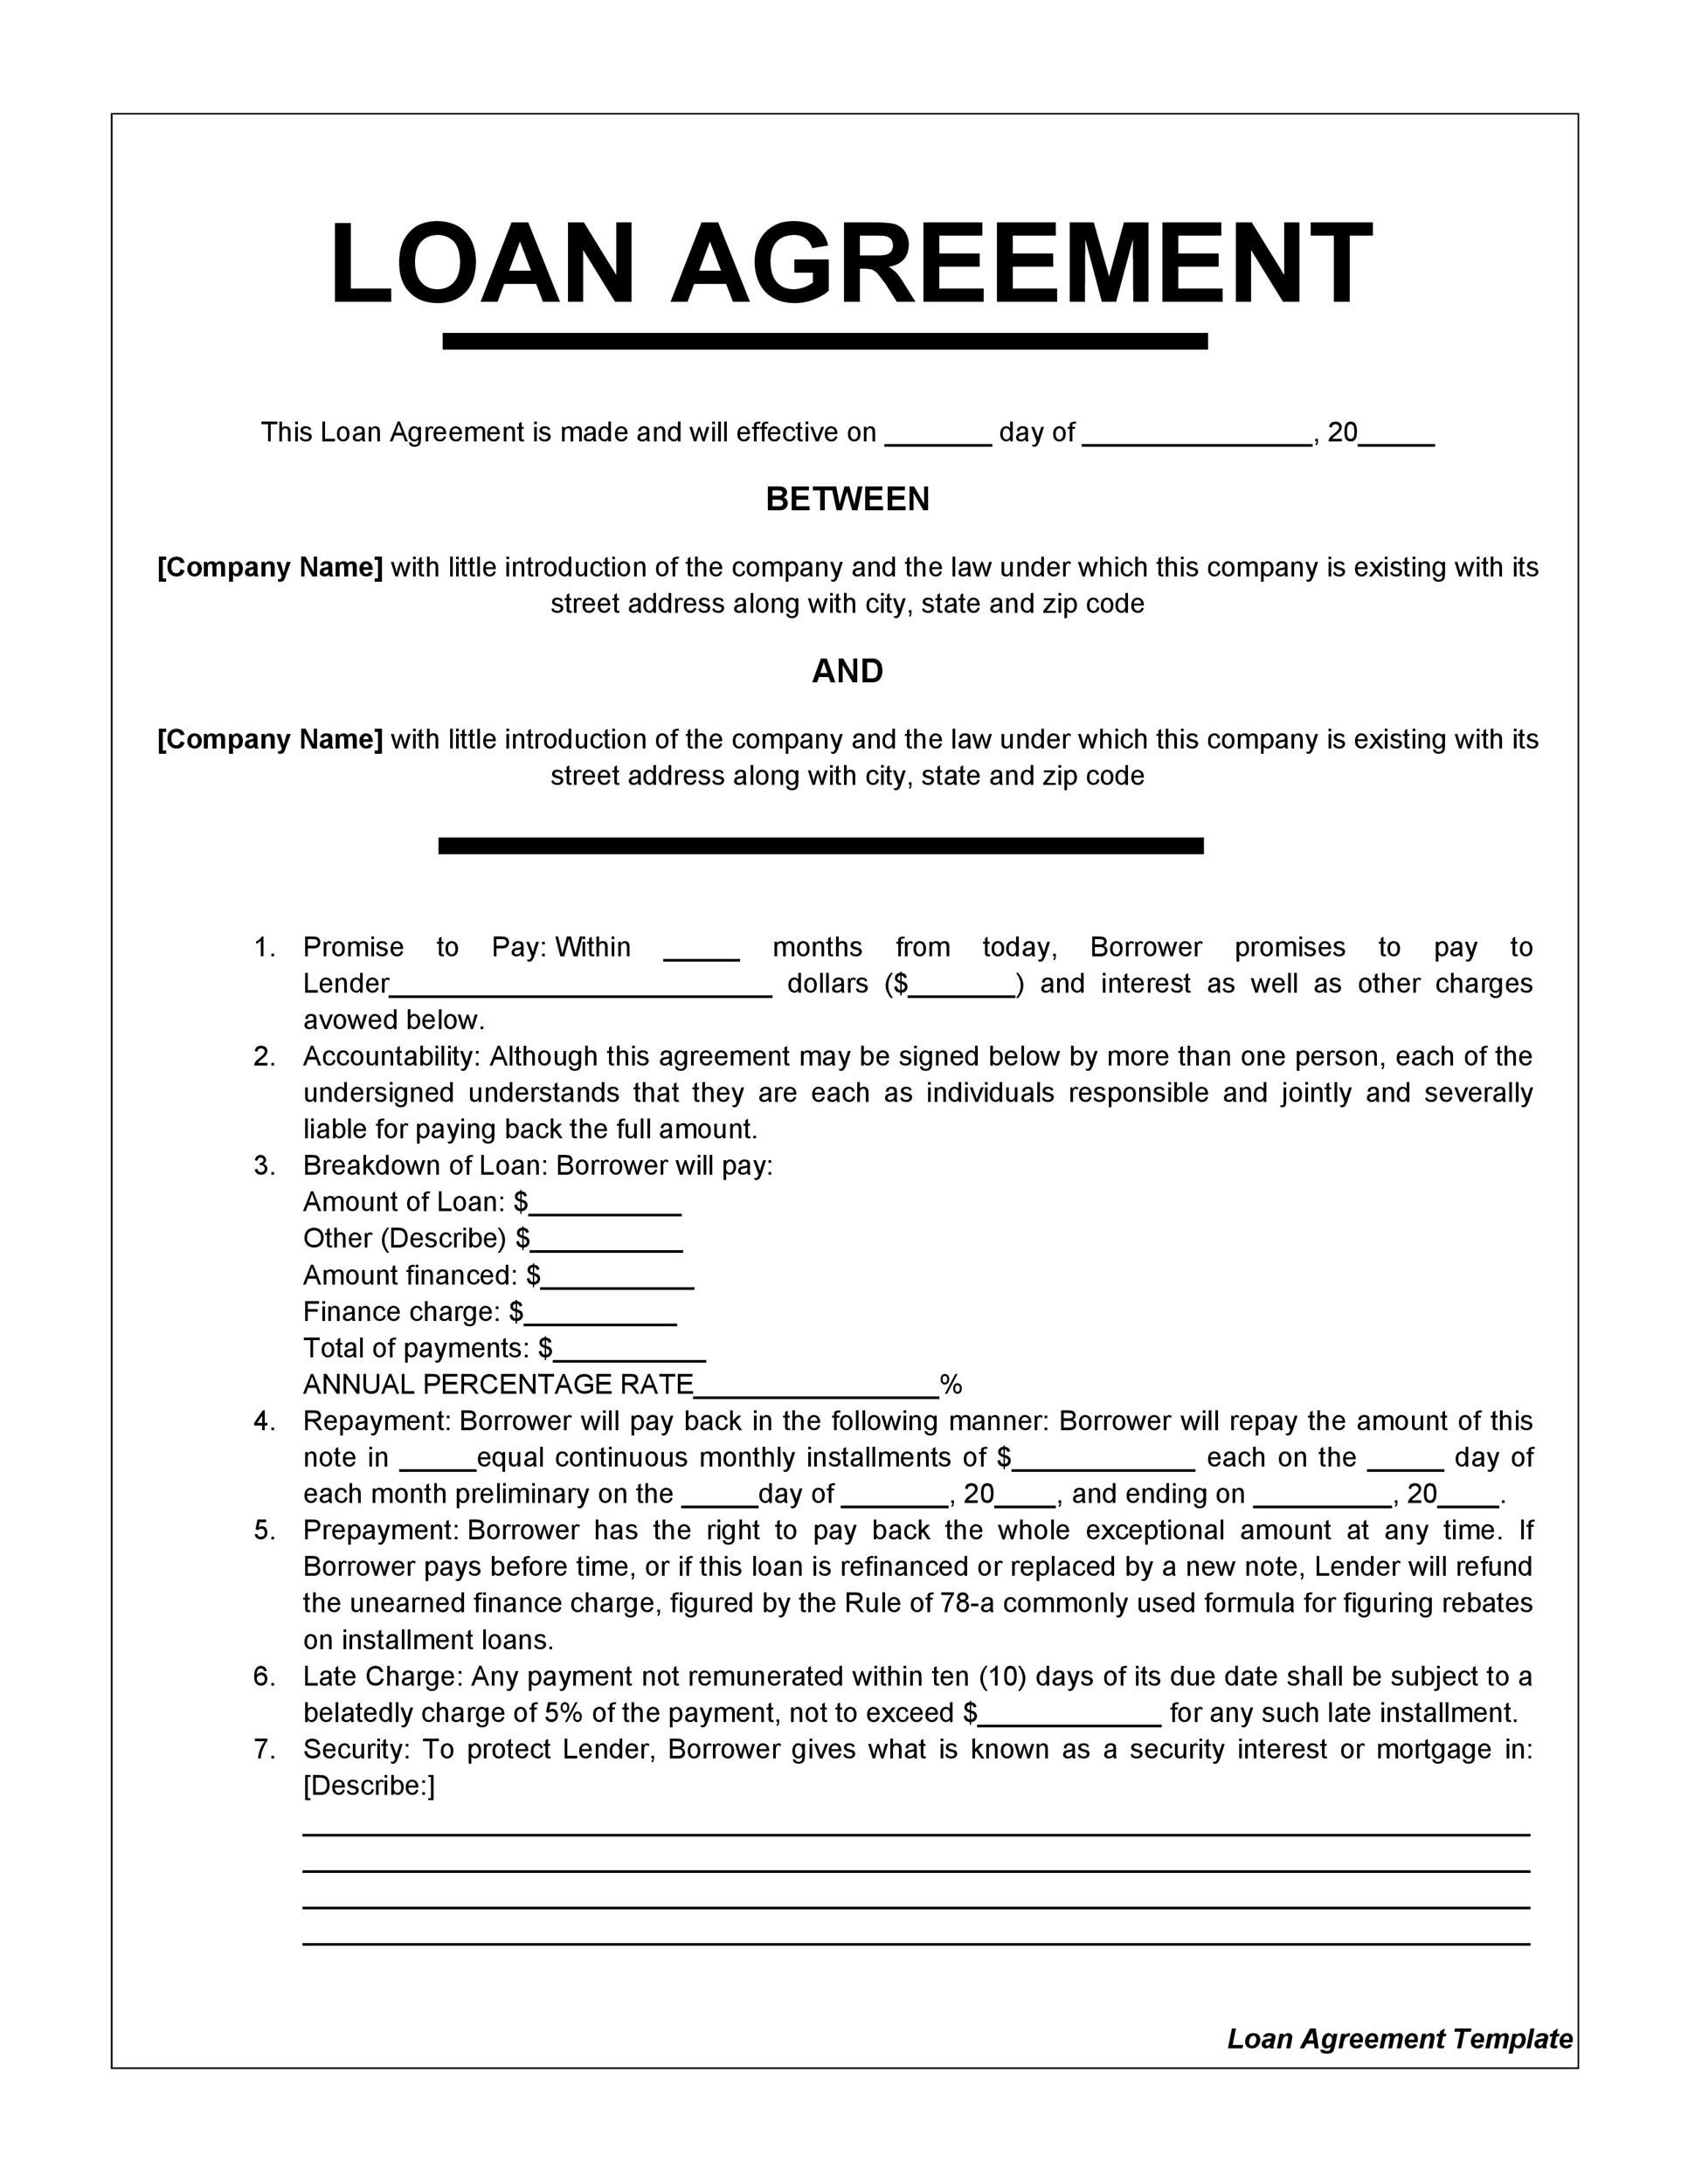 mortgage agreement format